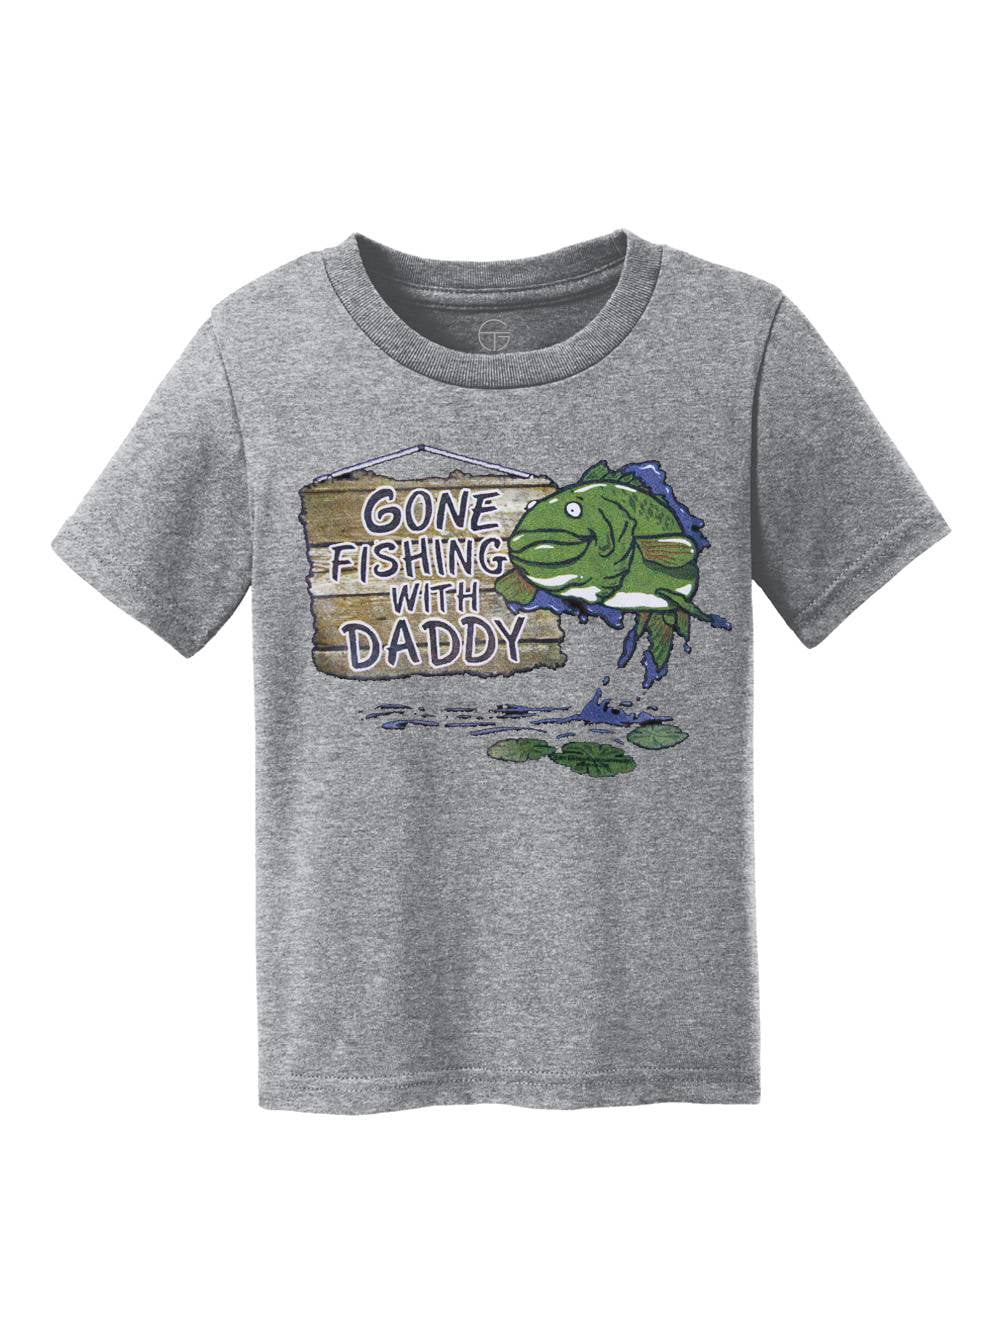 Gone Fishing With Daddy Kids Cotton T-Shirt - Athletic Heather - X-Large